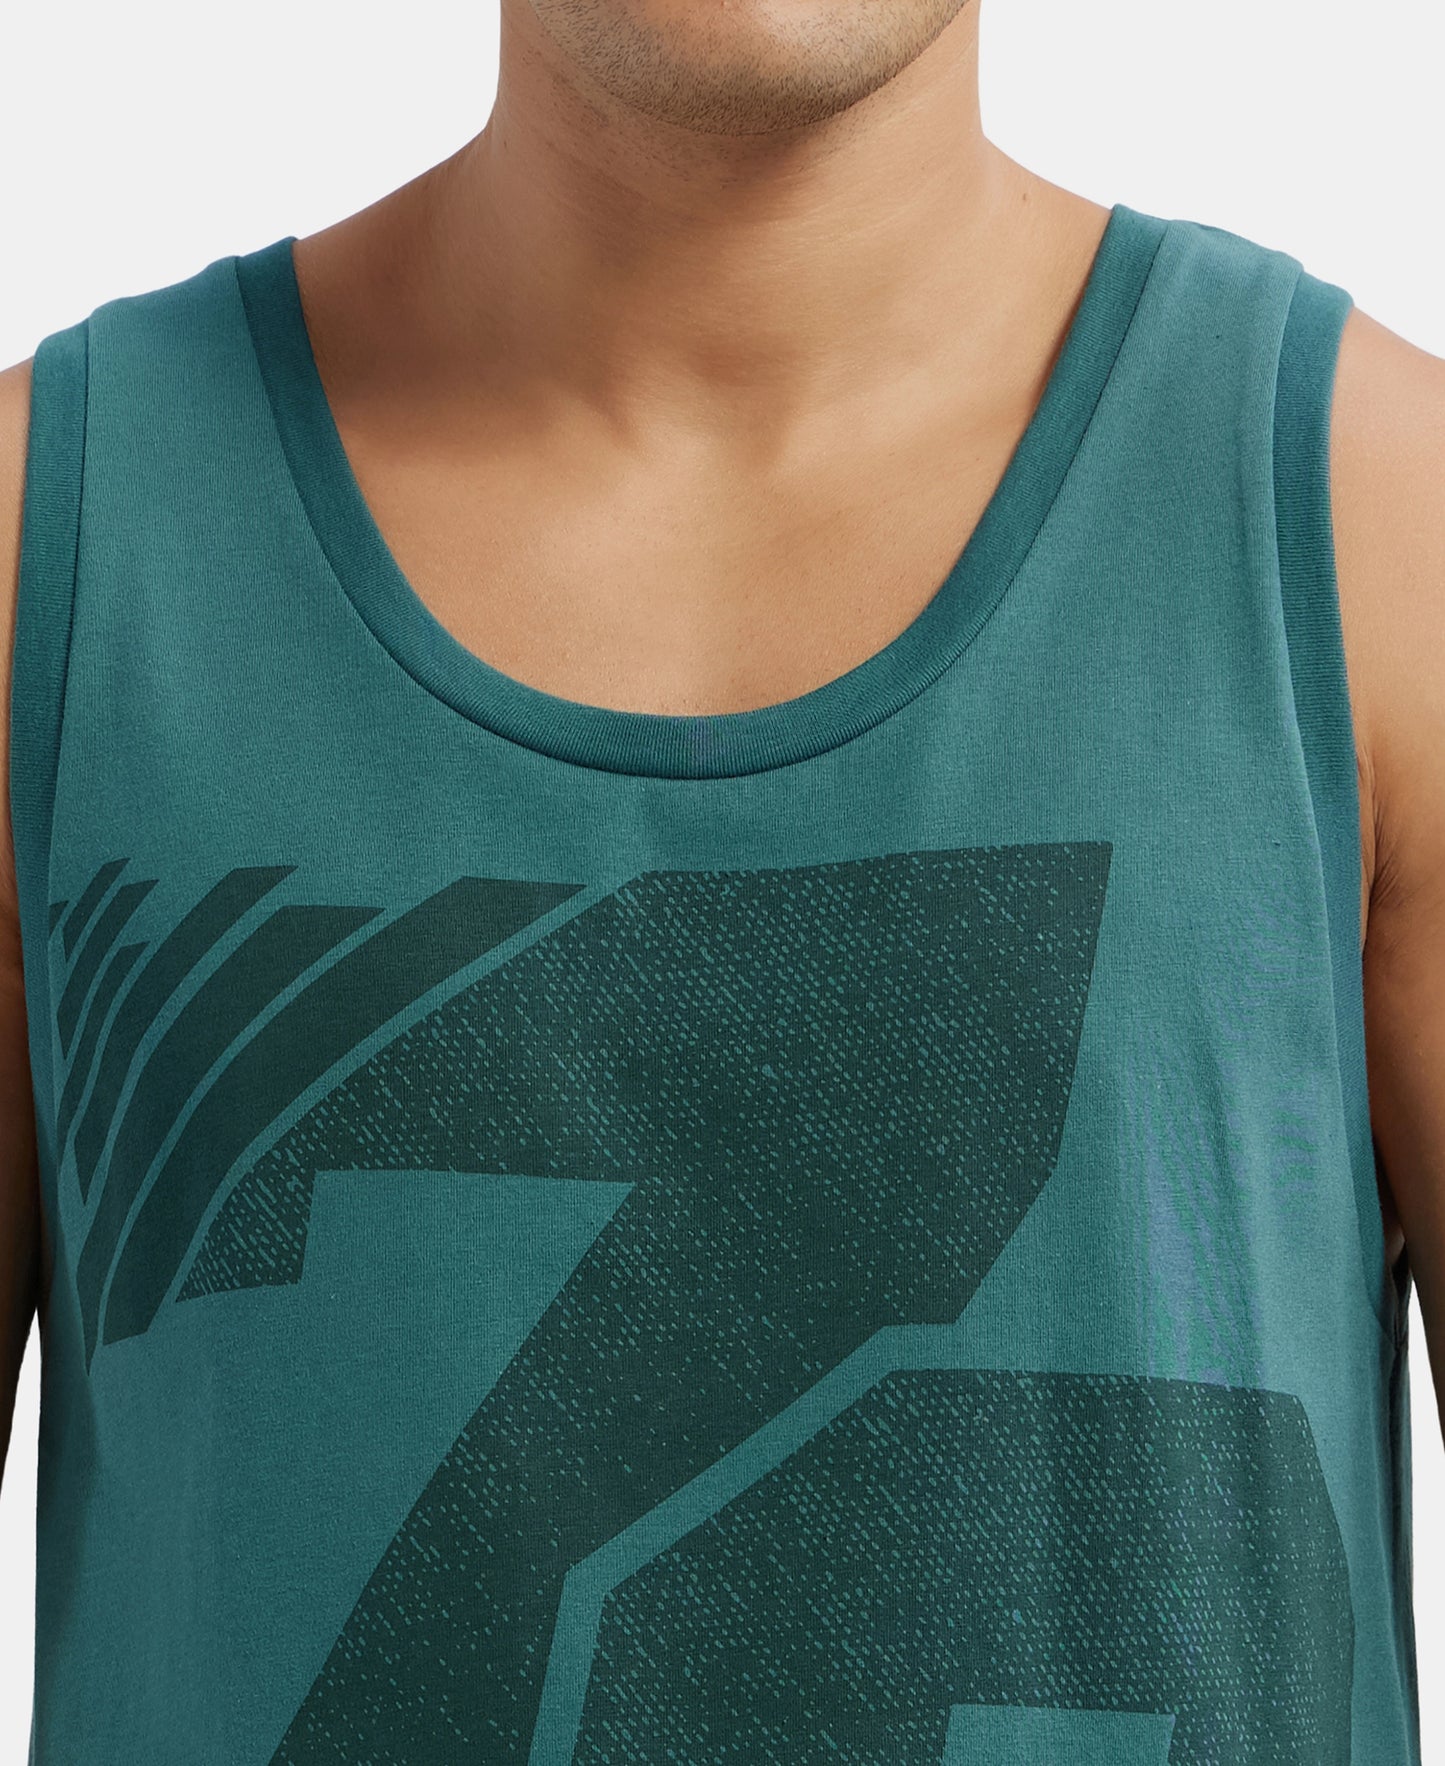 Super Combed Cotton Rich Graphic Printed Tank Top - Pacific Green